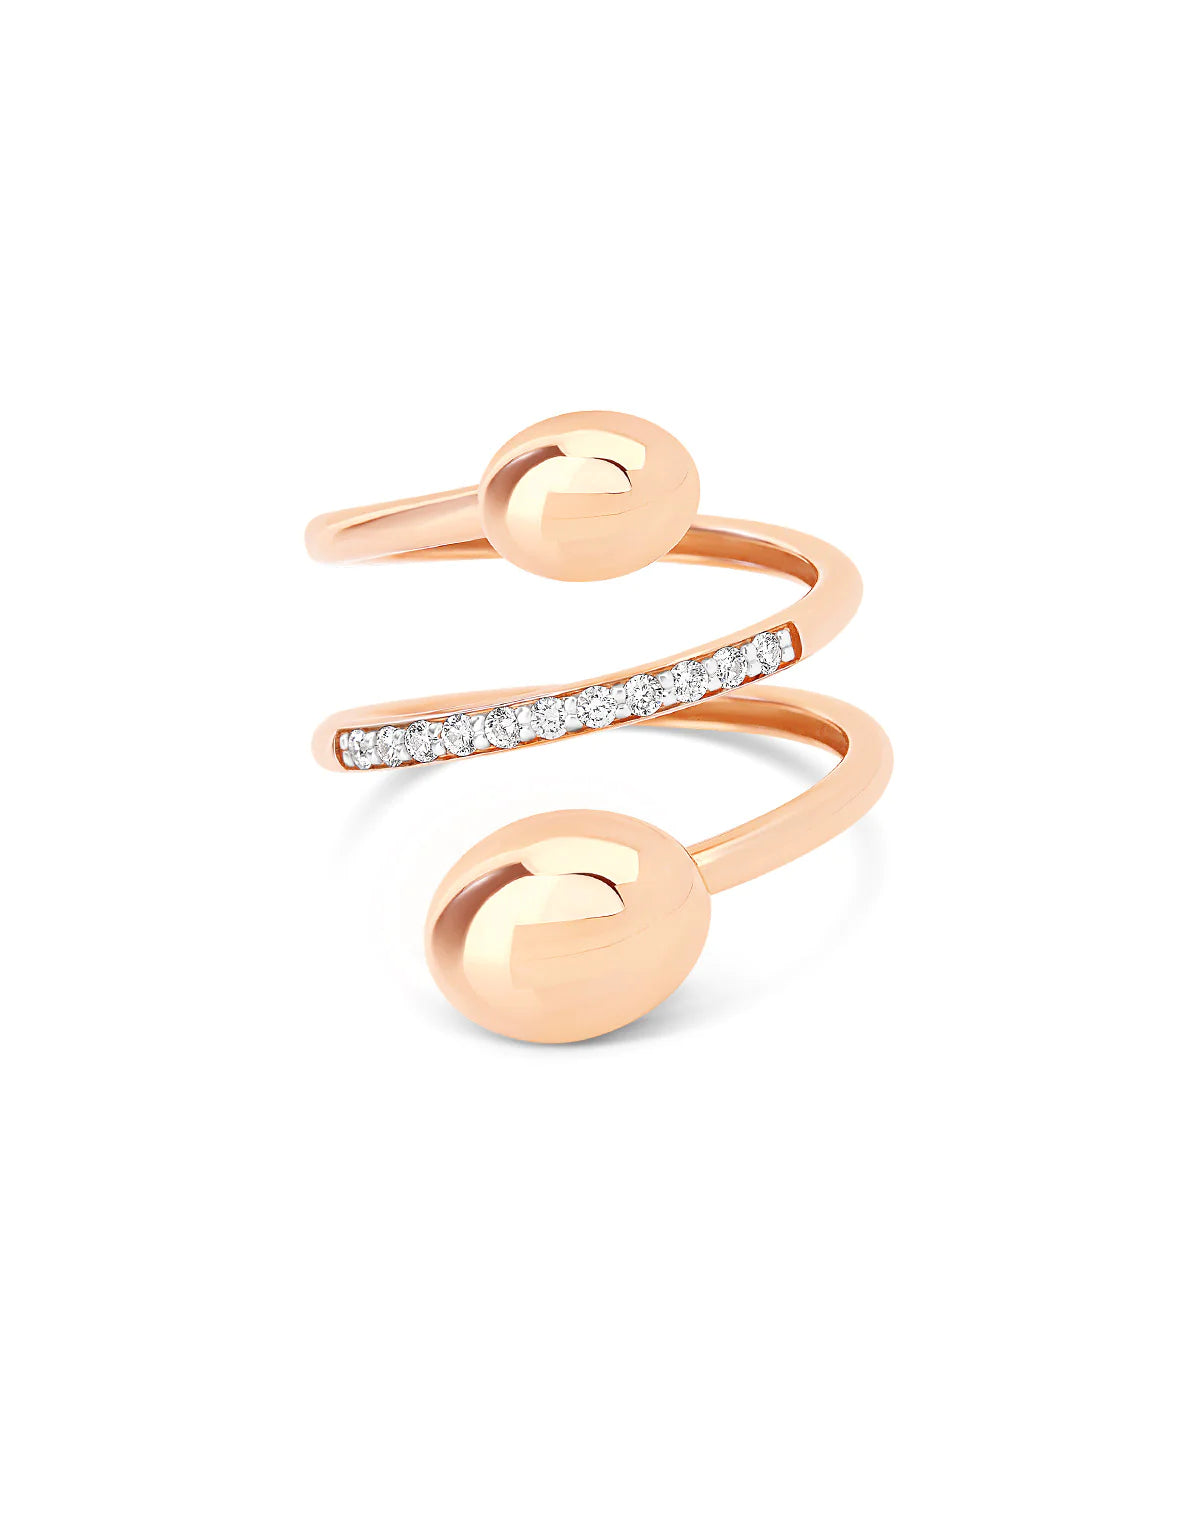 Elite Rose Gold and Diamonds Spiral Ring - Orsini Jewellers